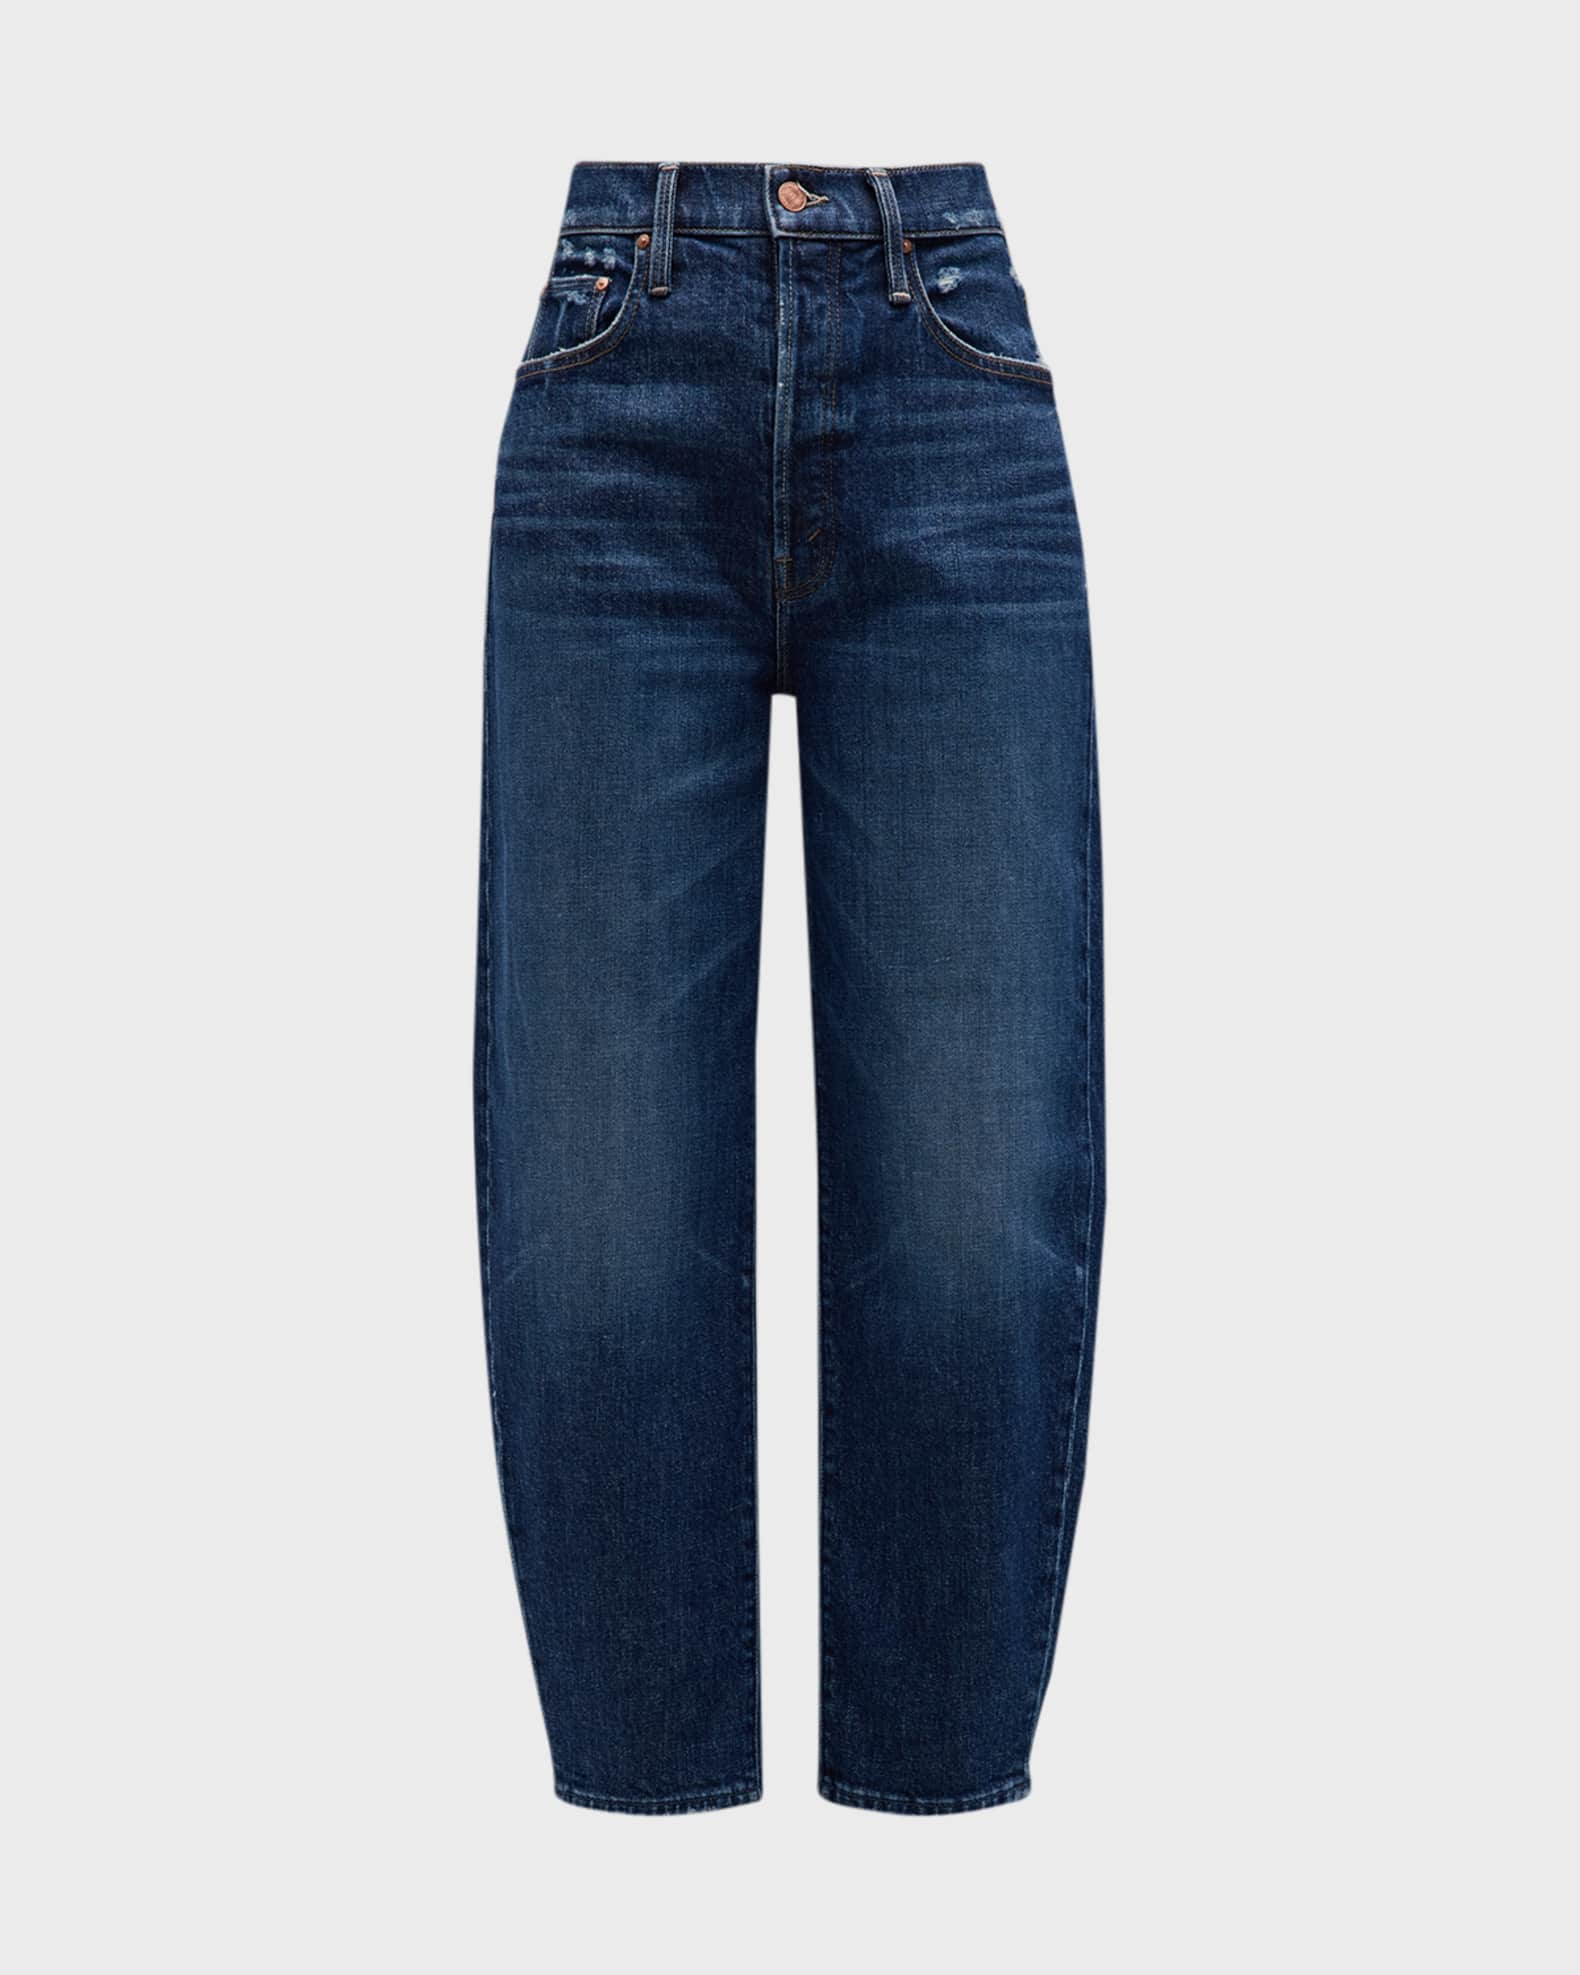 MOTHER The Curbside Flood Jeans | Neiman Marcus